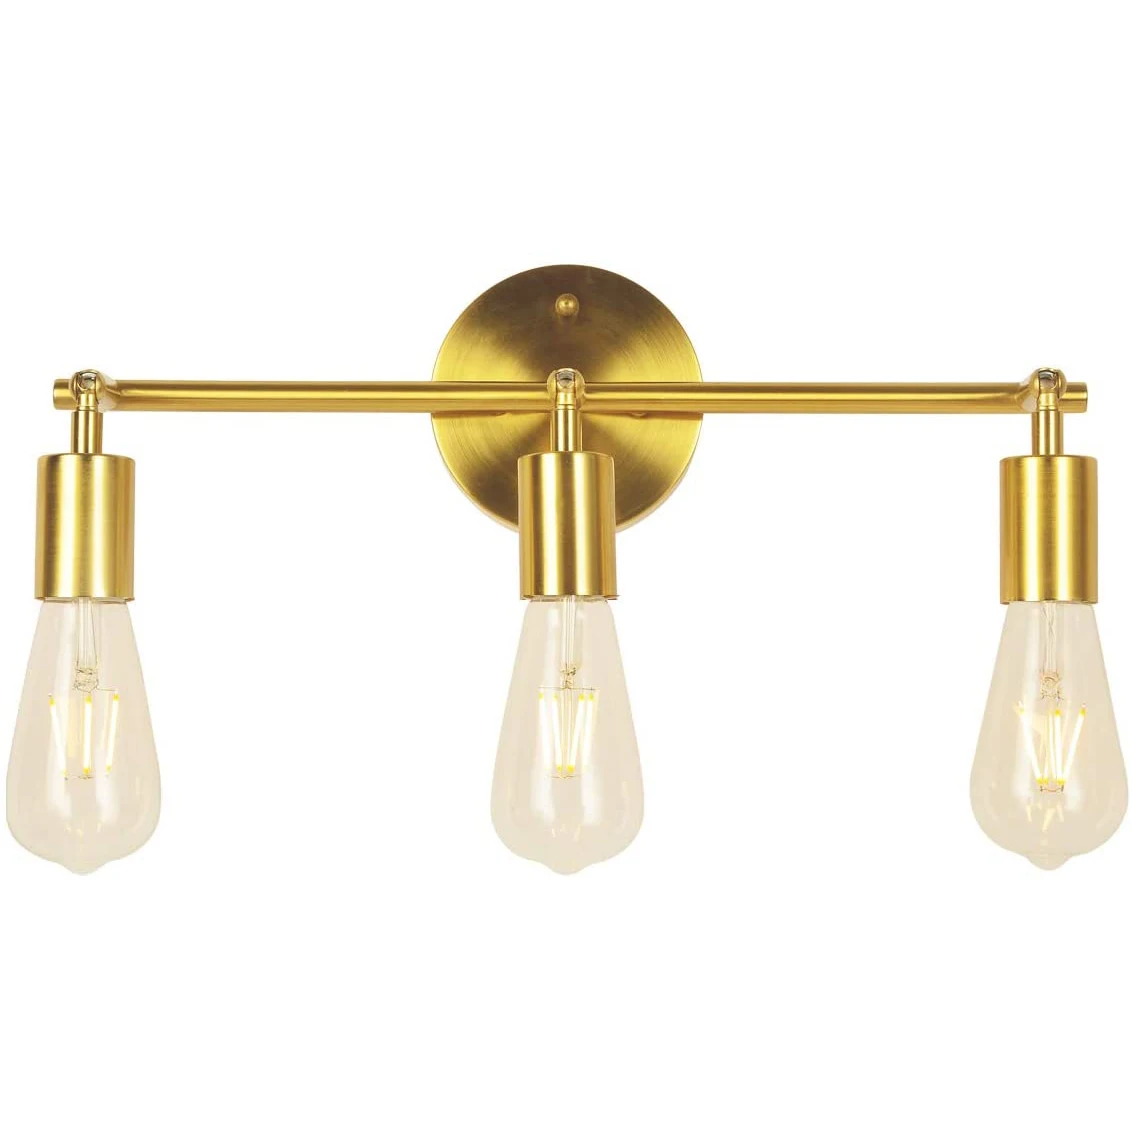 3 Lights Brass Wall Sconce Bathroom Vanity Modern Industrial Wall Lamp Pole Wall Mount Lighting Fixture Gold Color